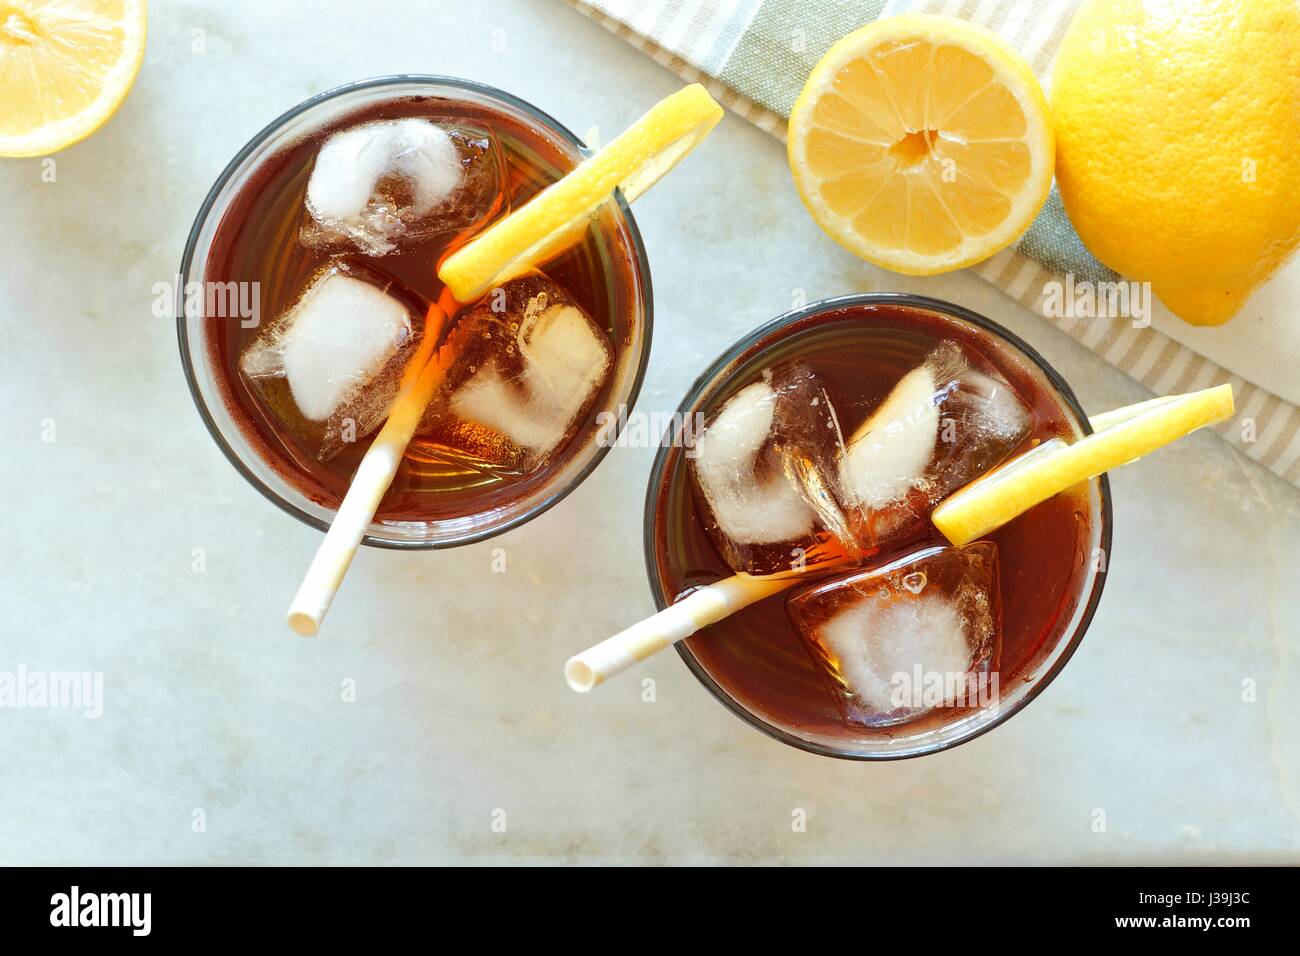 Two glasses of iced tea with lemons, overhead view on a white marble background Stock Photo